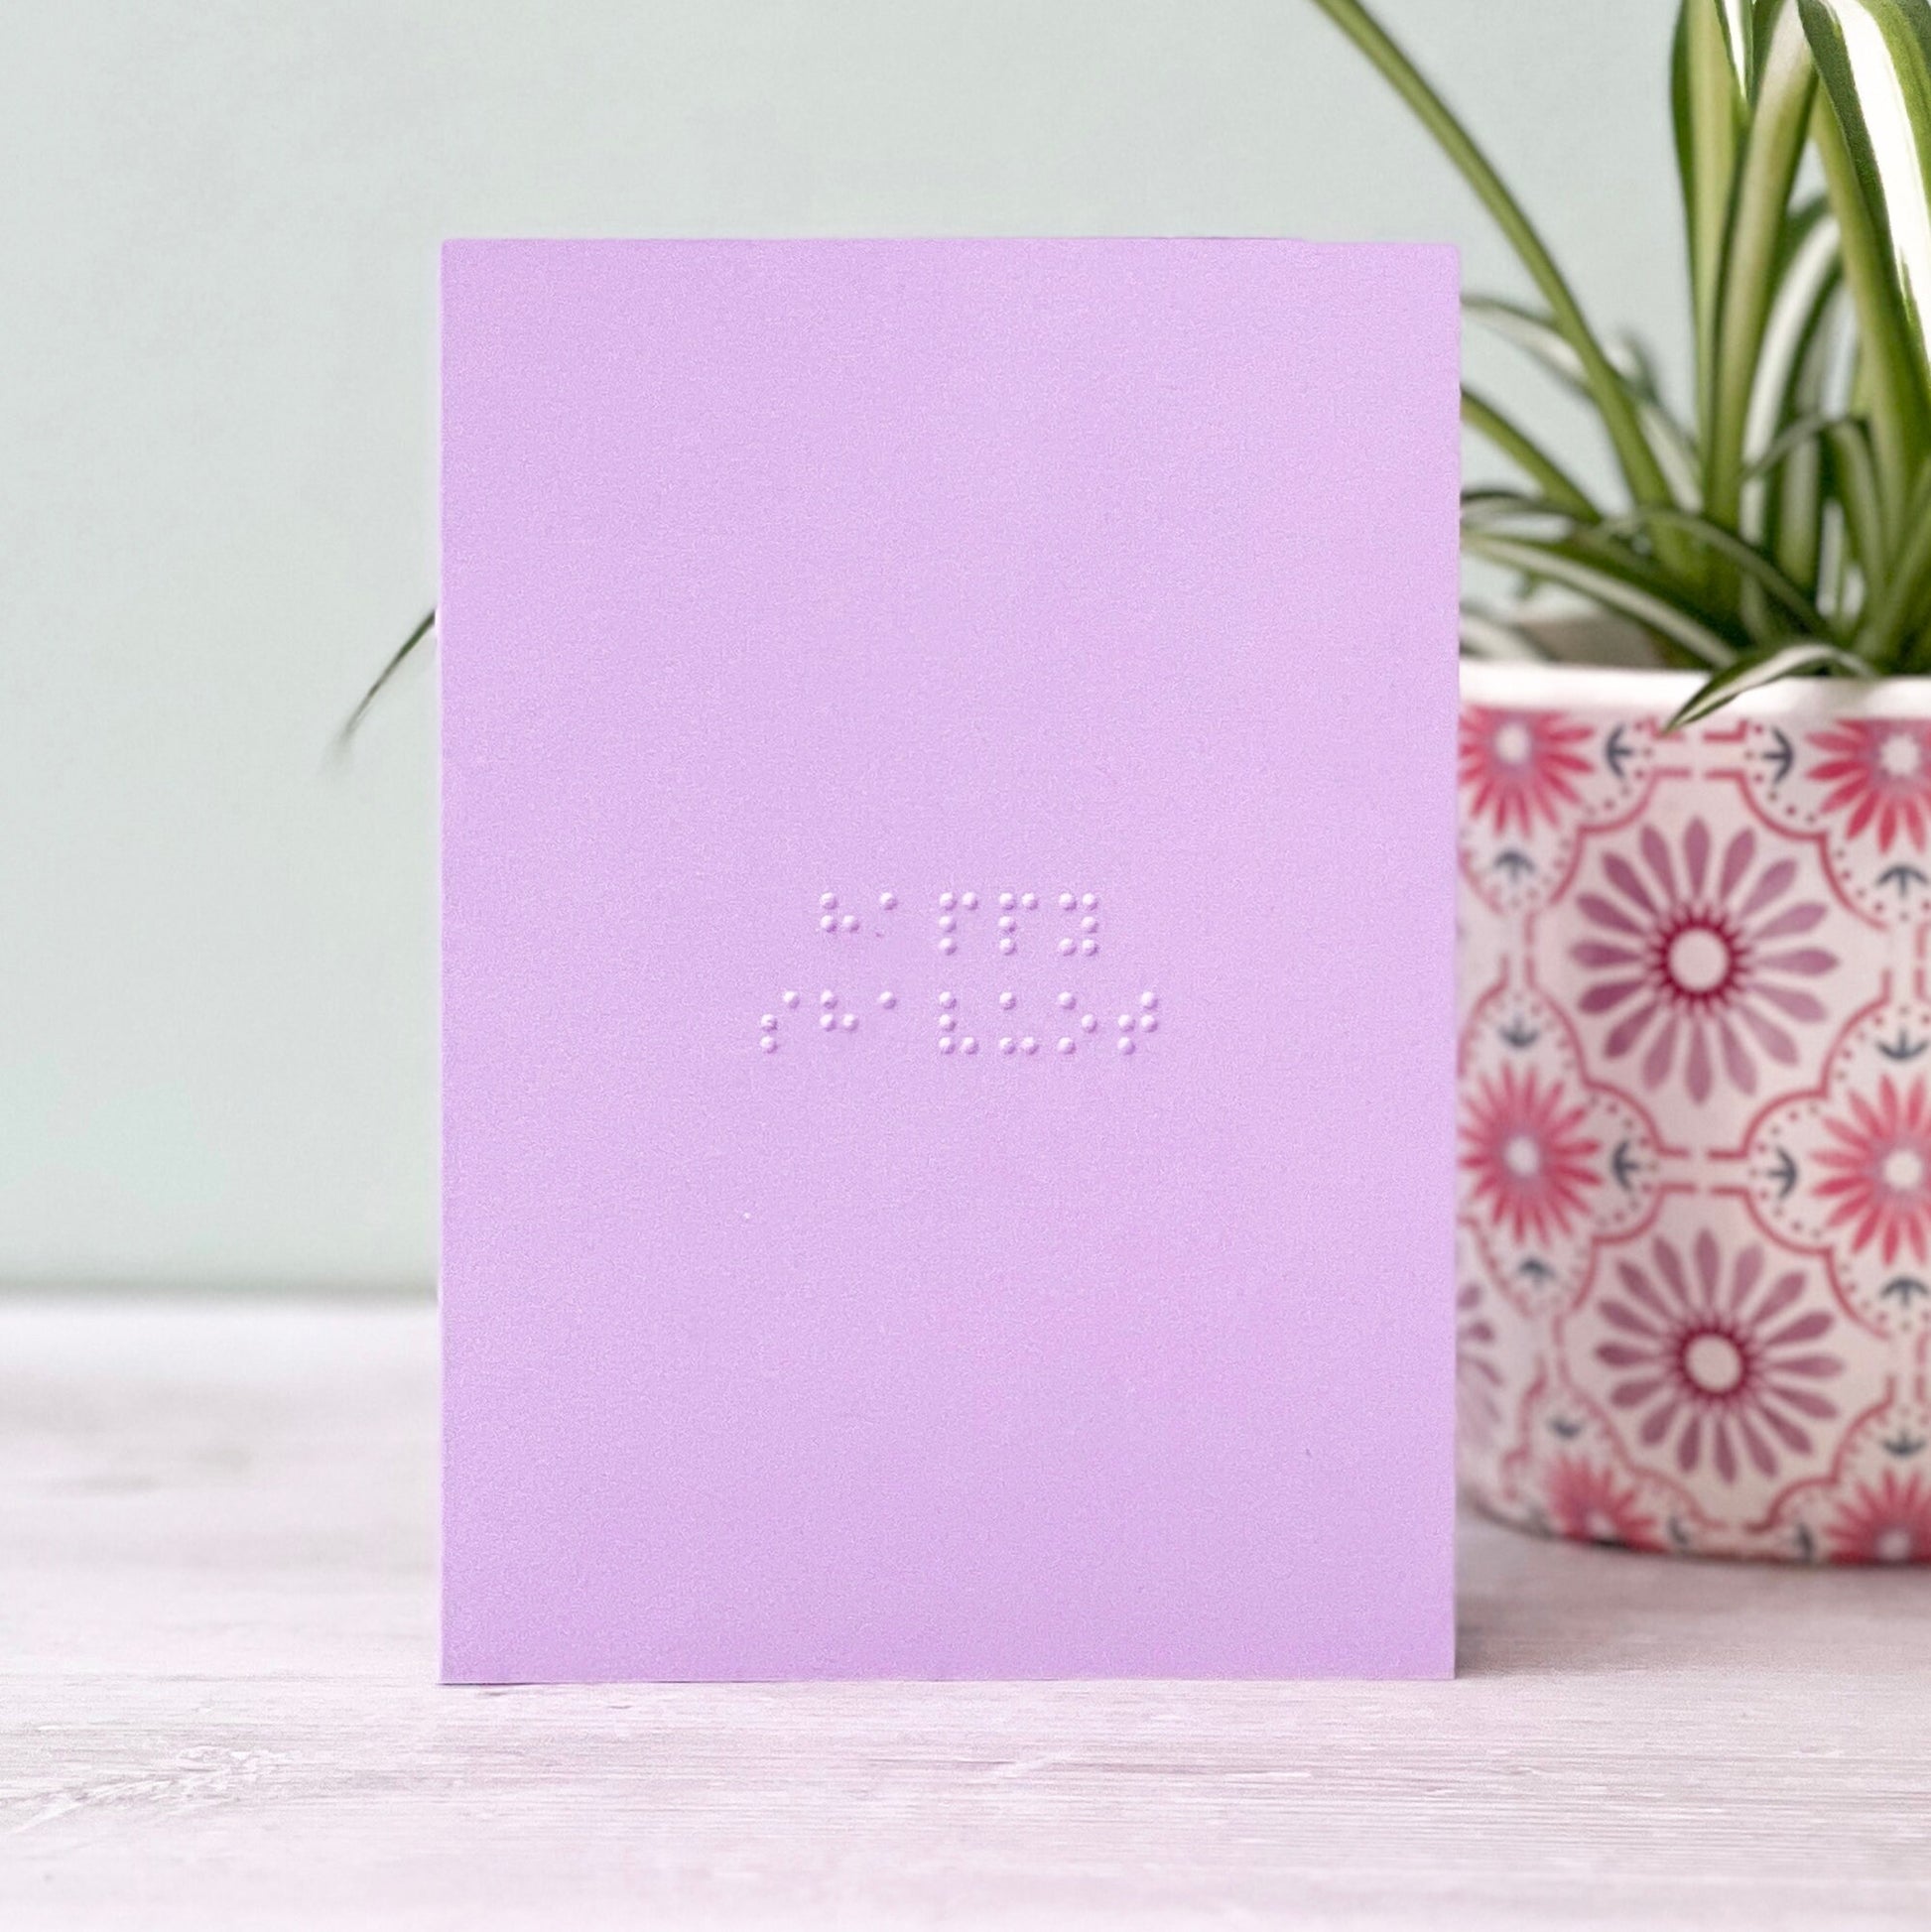 A pastel purple greetings card with happy shavuot written in grade 1 braille. There is a plant to the right of the photo.